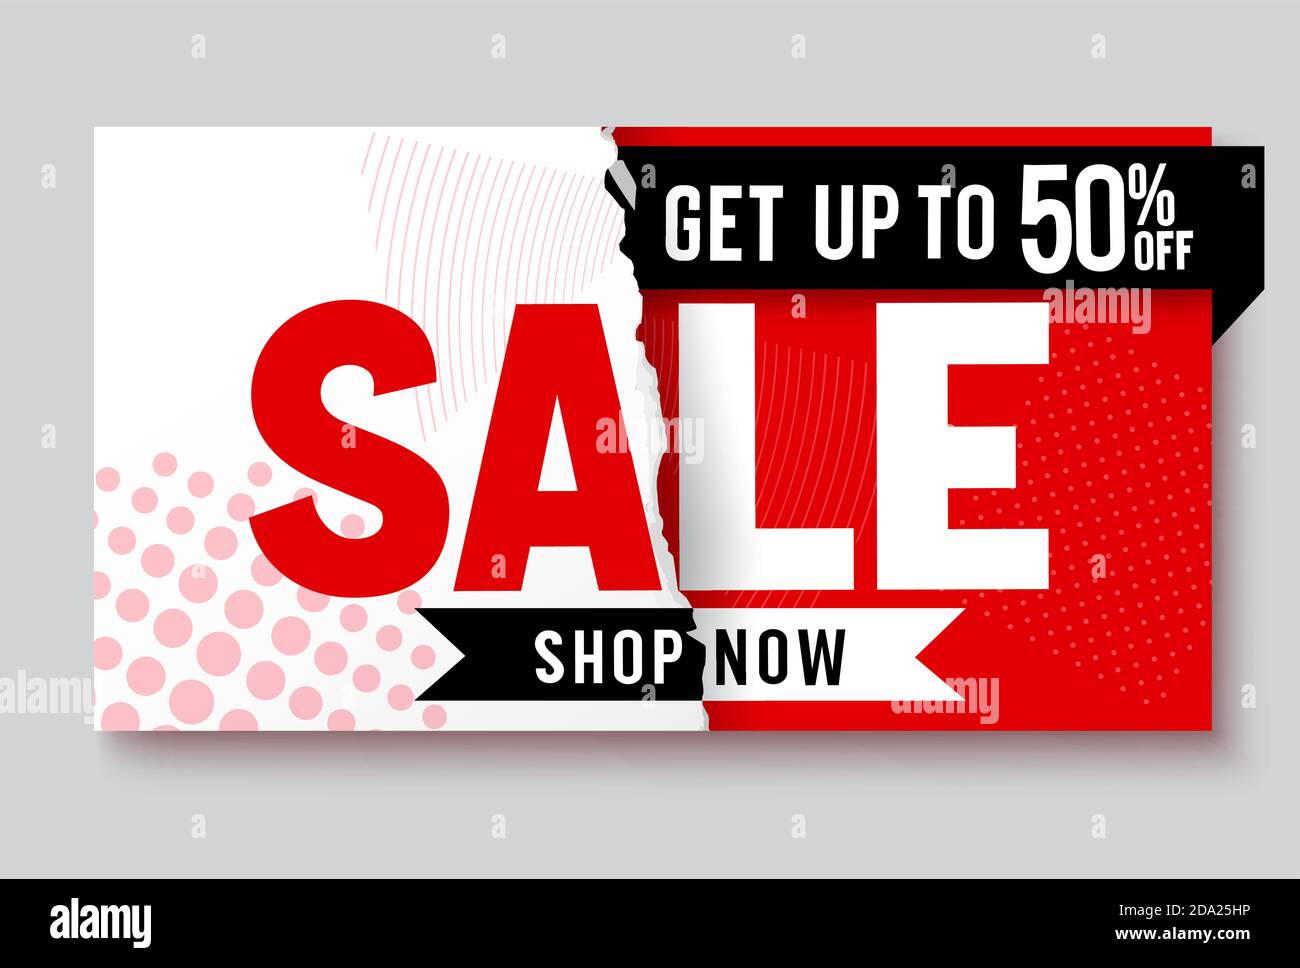 Sale vector banner design. Sale get up to 50% off text in white and red background for shopping discount promotion ad. Vector illustration. Stock Vector